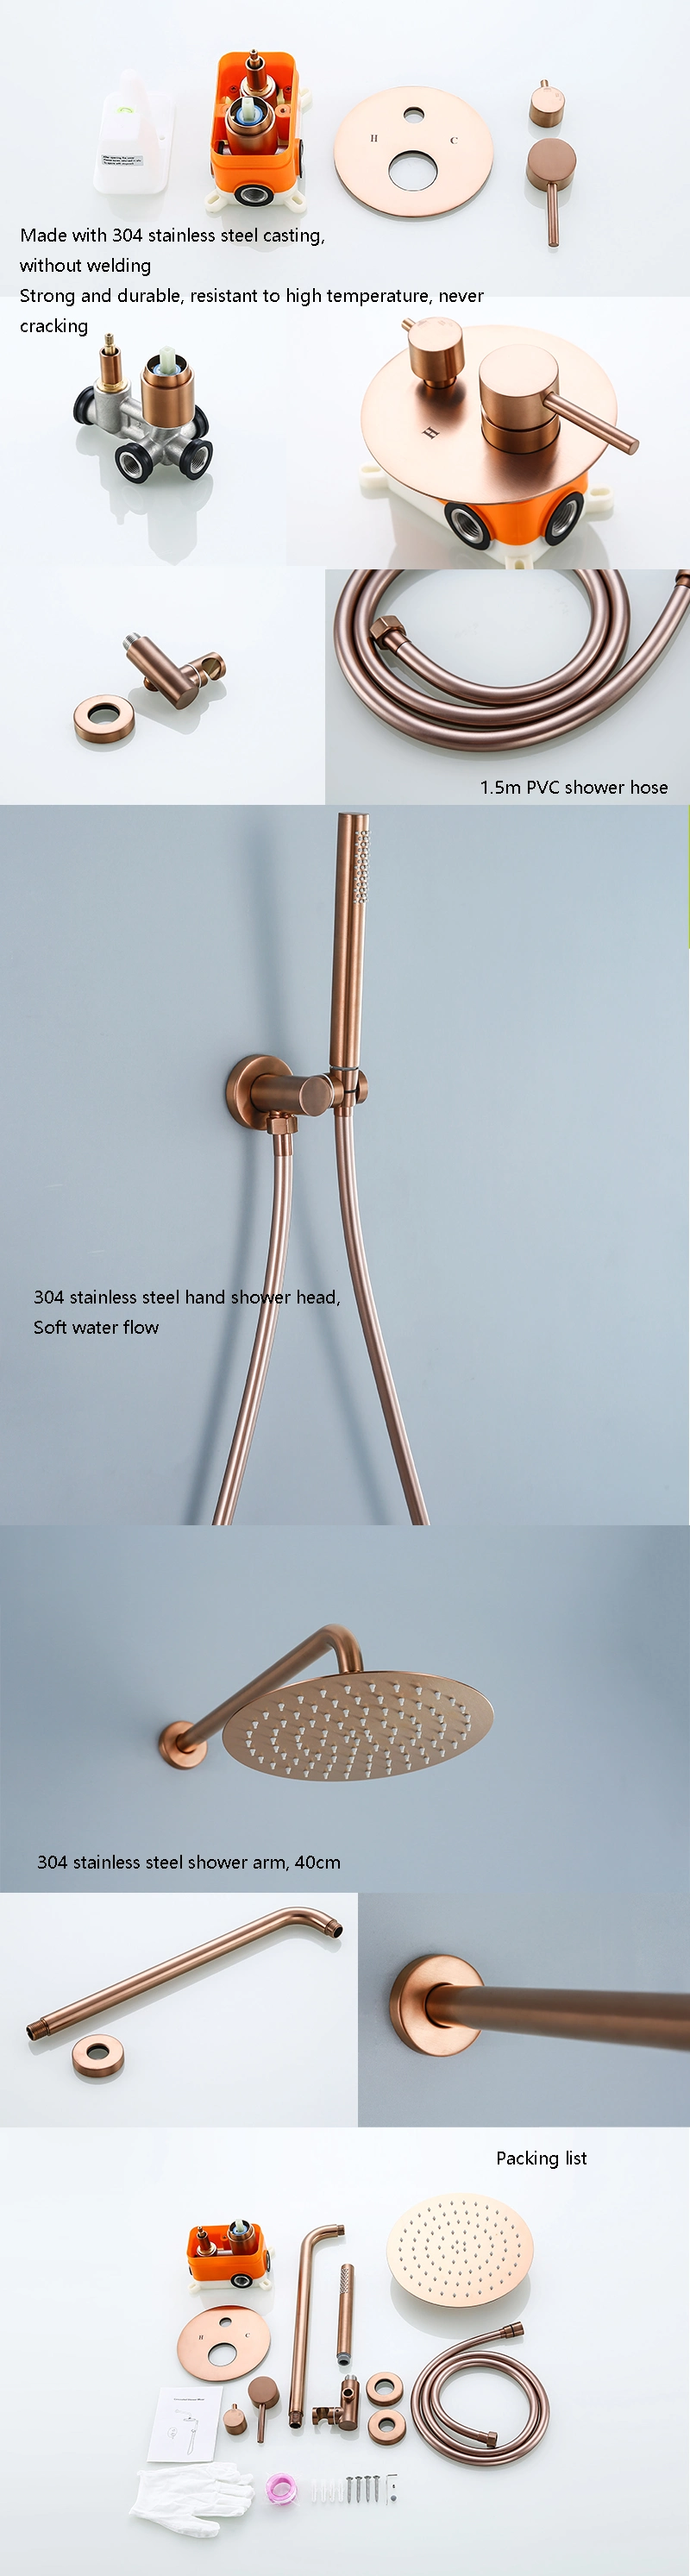 Two-Function Shower Mixer Set with Shower Head and Hand Shower